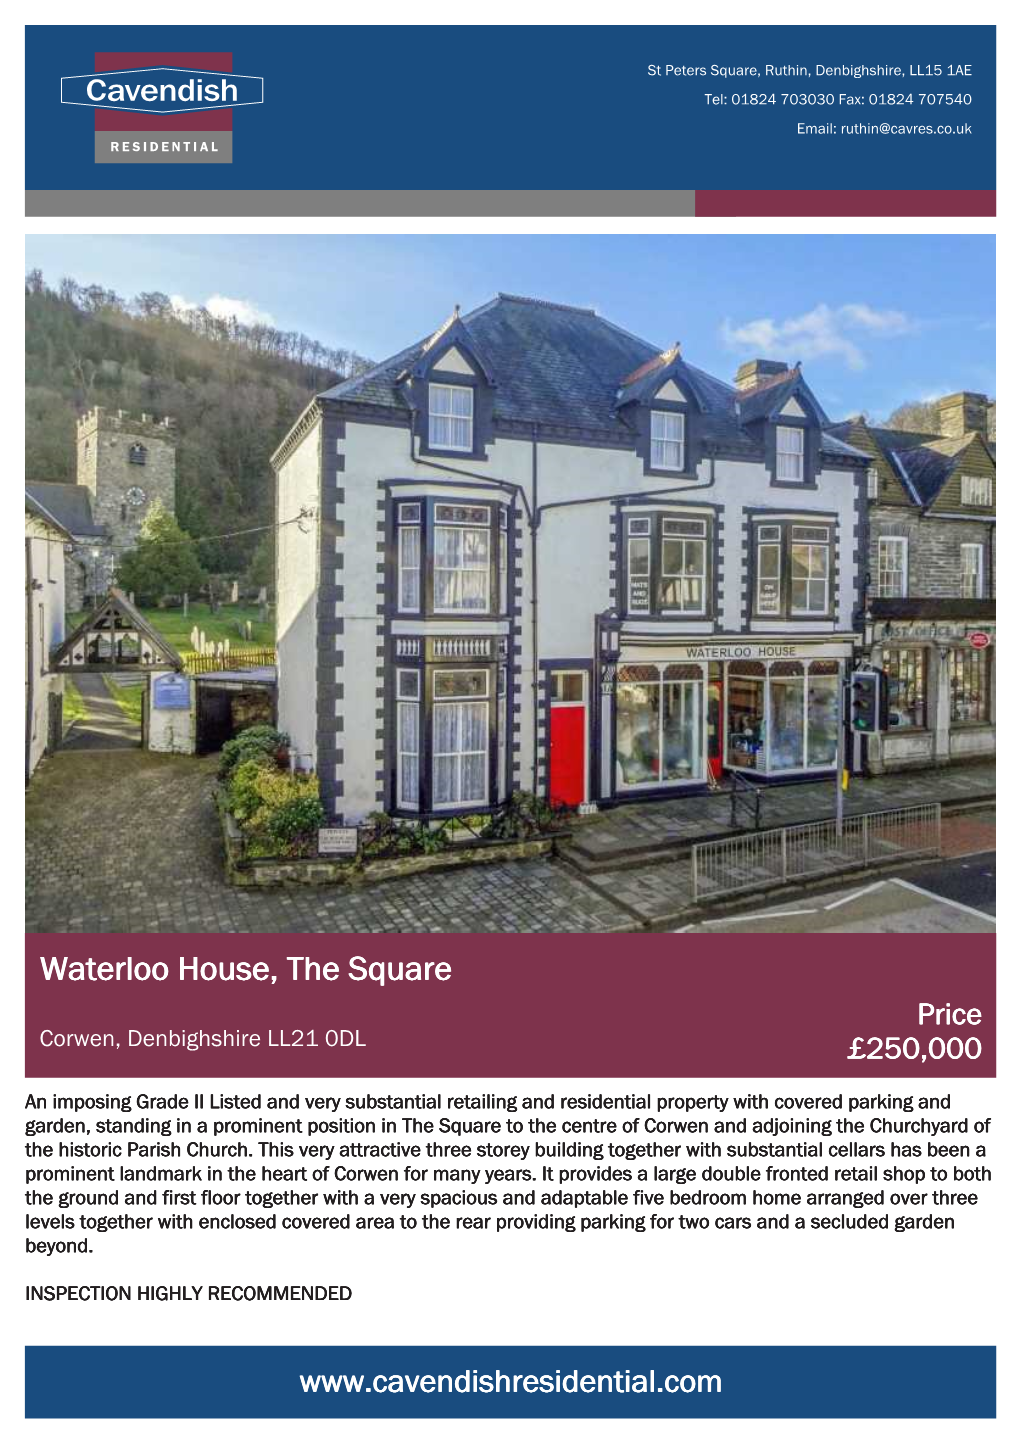 Waterloo House, the Square Price Corwen, Denbighshire LL21 0DL £250,000